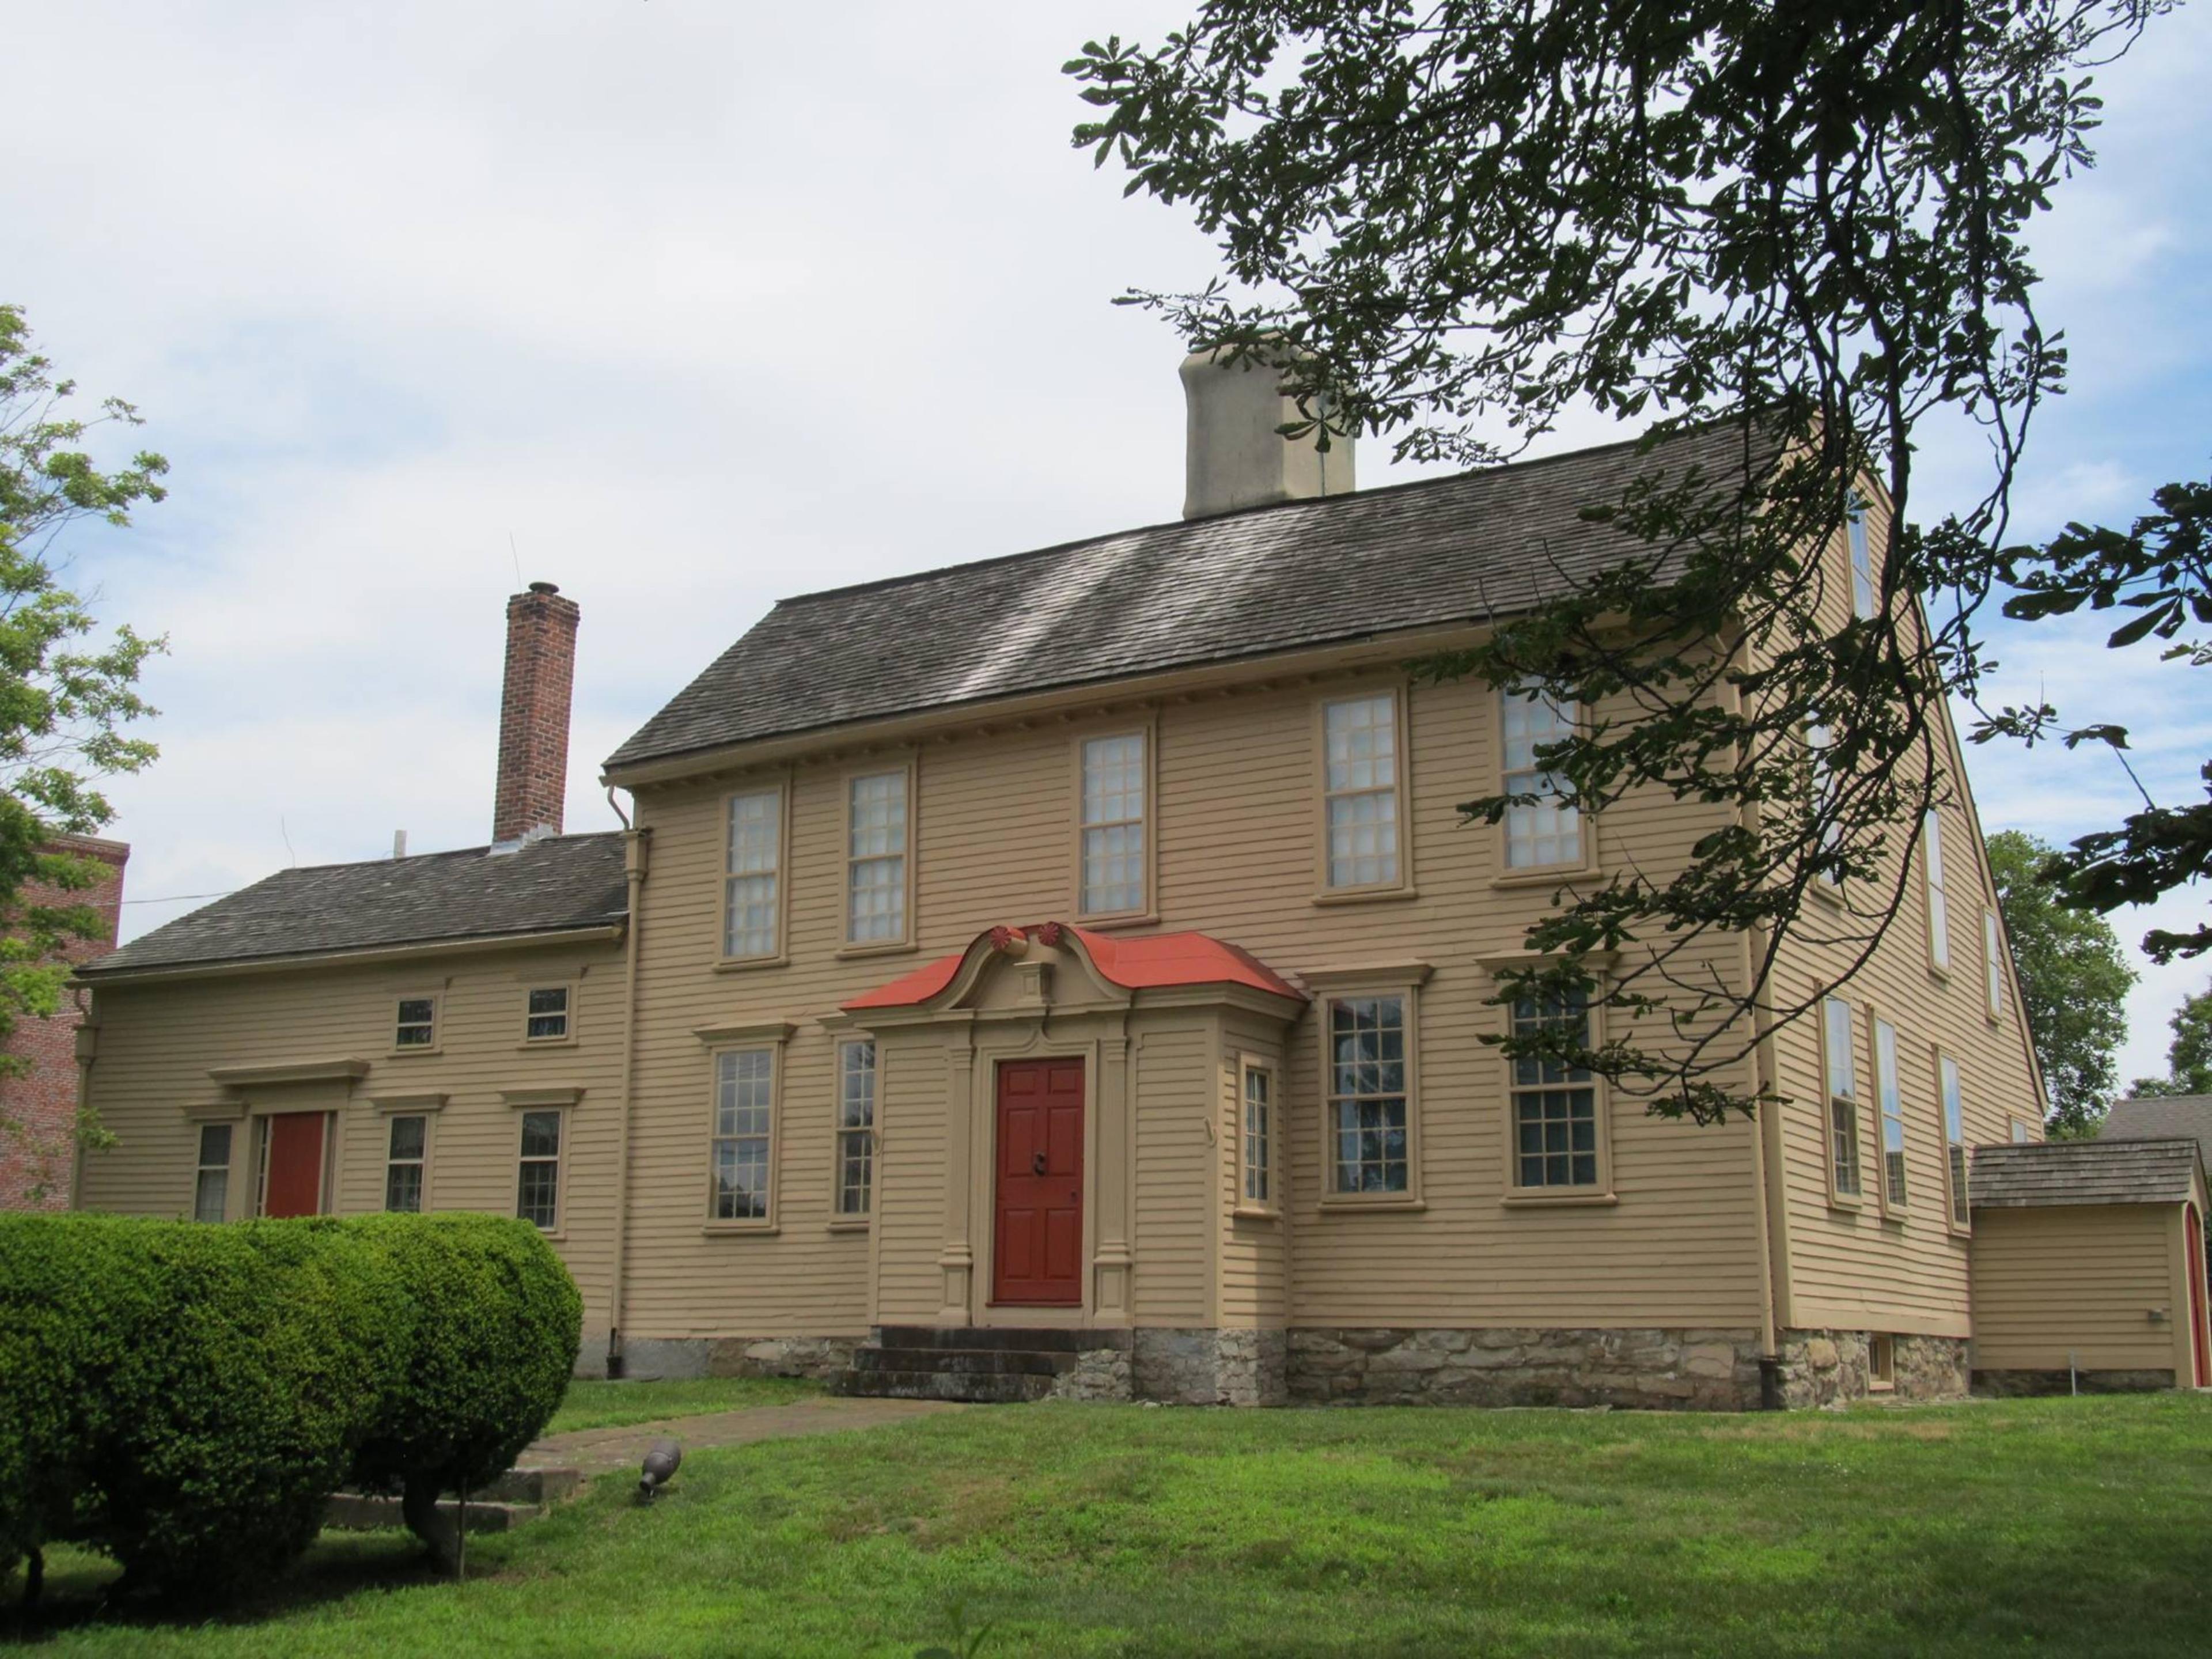 Babcock-Smith House Museum